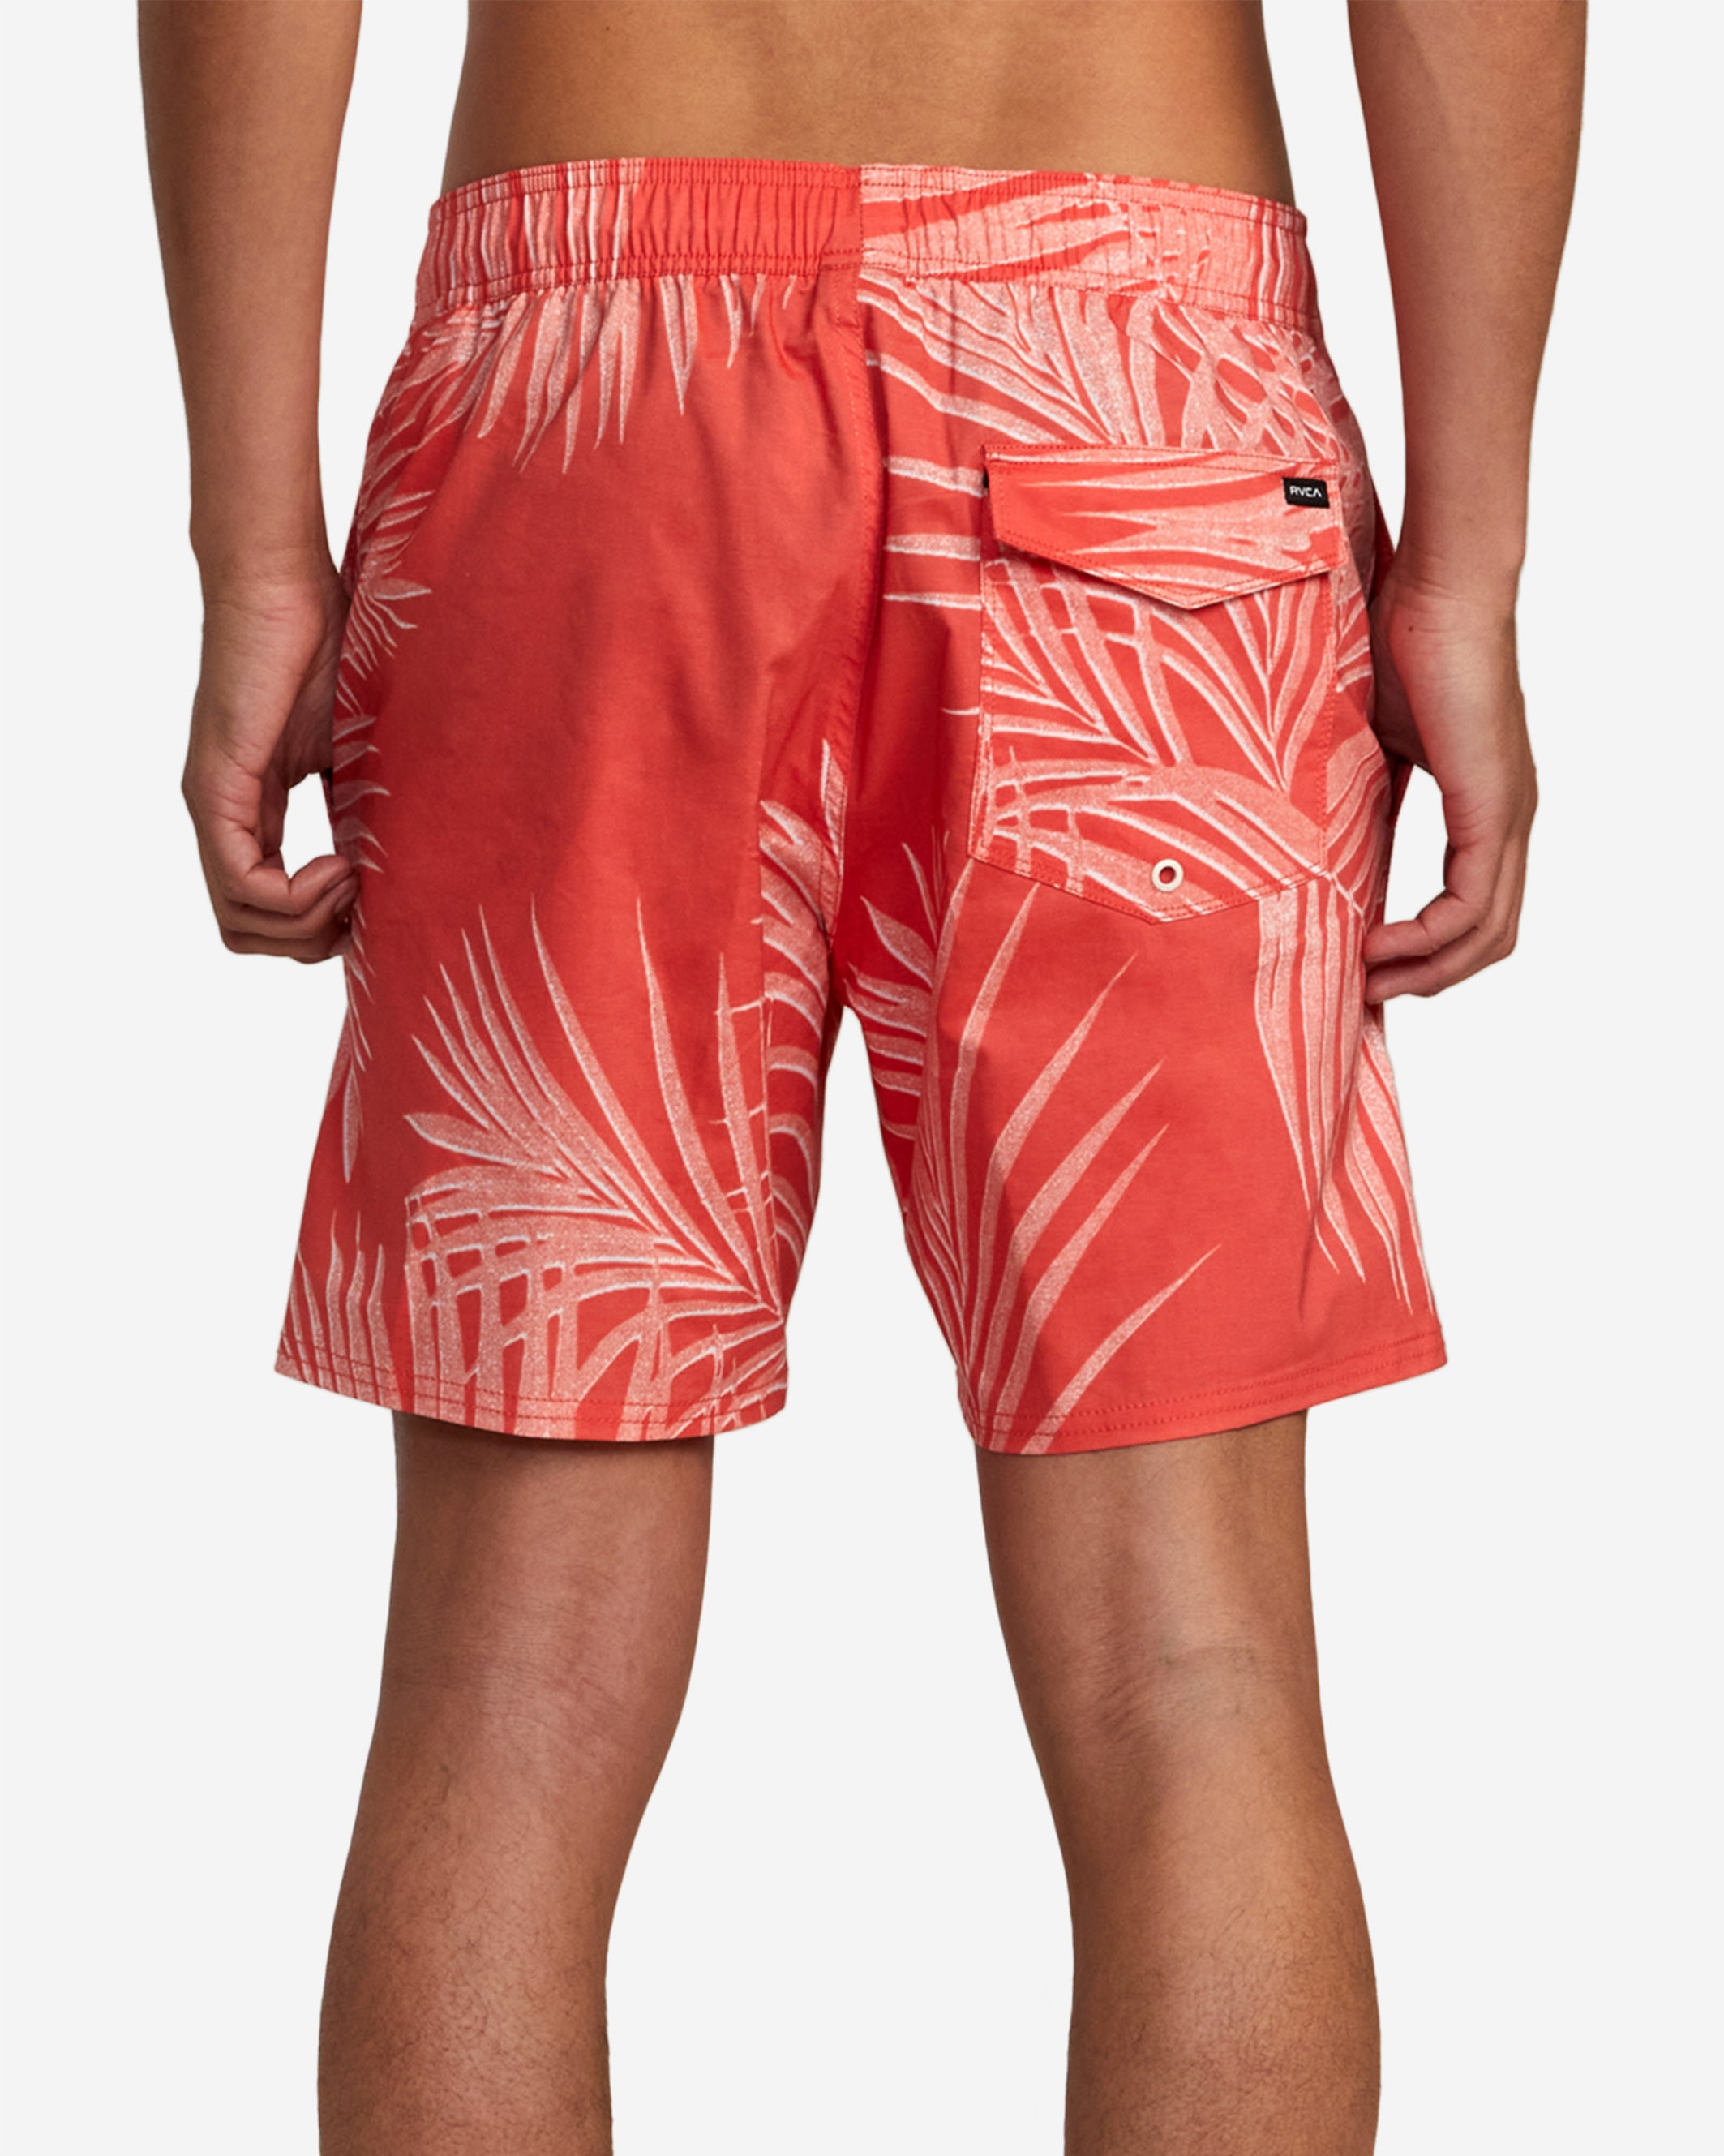 Sustainable style meets performance-enhancing fabrics in the RVCA Barnes Elastic Boardshorts 17". Featuring an allover bold print, these standout boardshorts offer an elastic drawcord waist, faux fly, pockets for your needs, triple needle stitching at the rise and RVCA logo branding throughout.